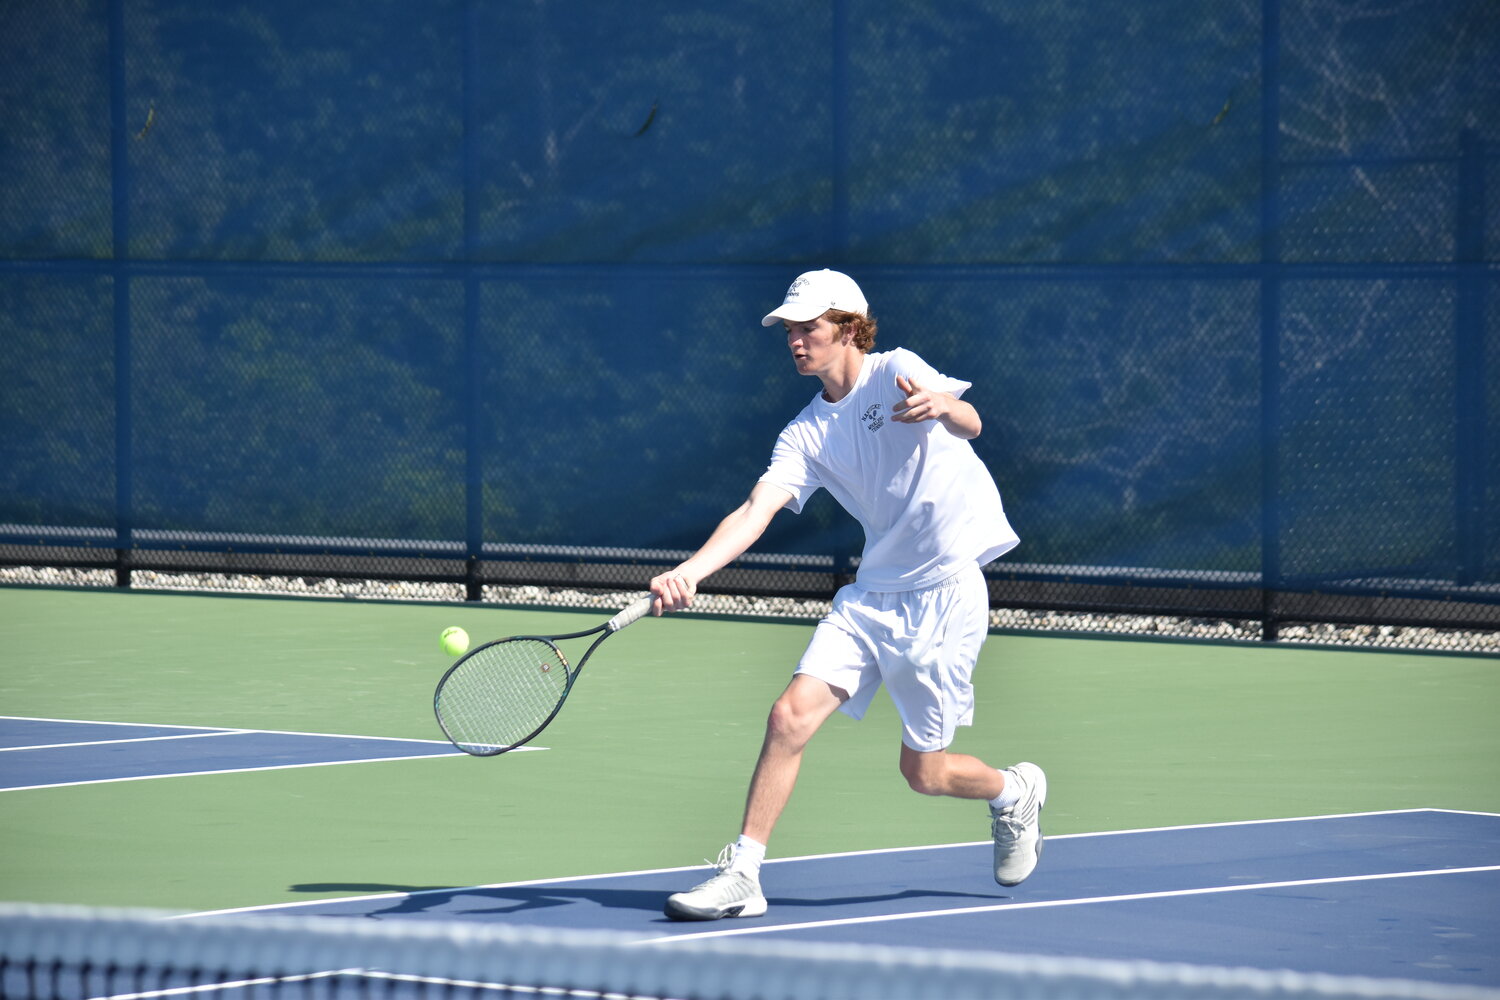 Hawkin Edwardes returns a shot during the Whalers' 4-1 win Friday against Seekonk in the round of 32 of the Div. 4 boys tennis state tournament.